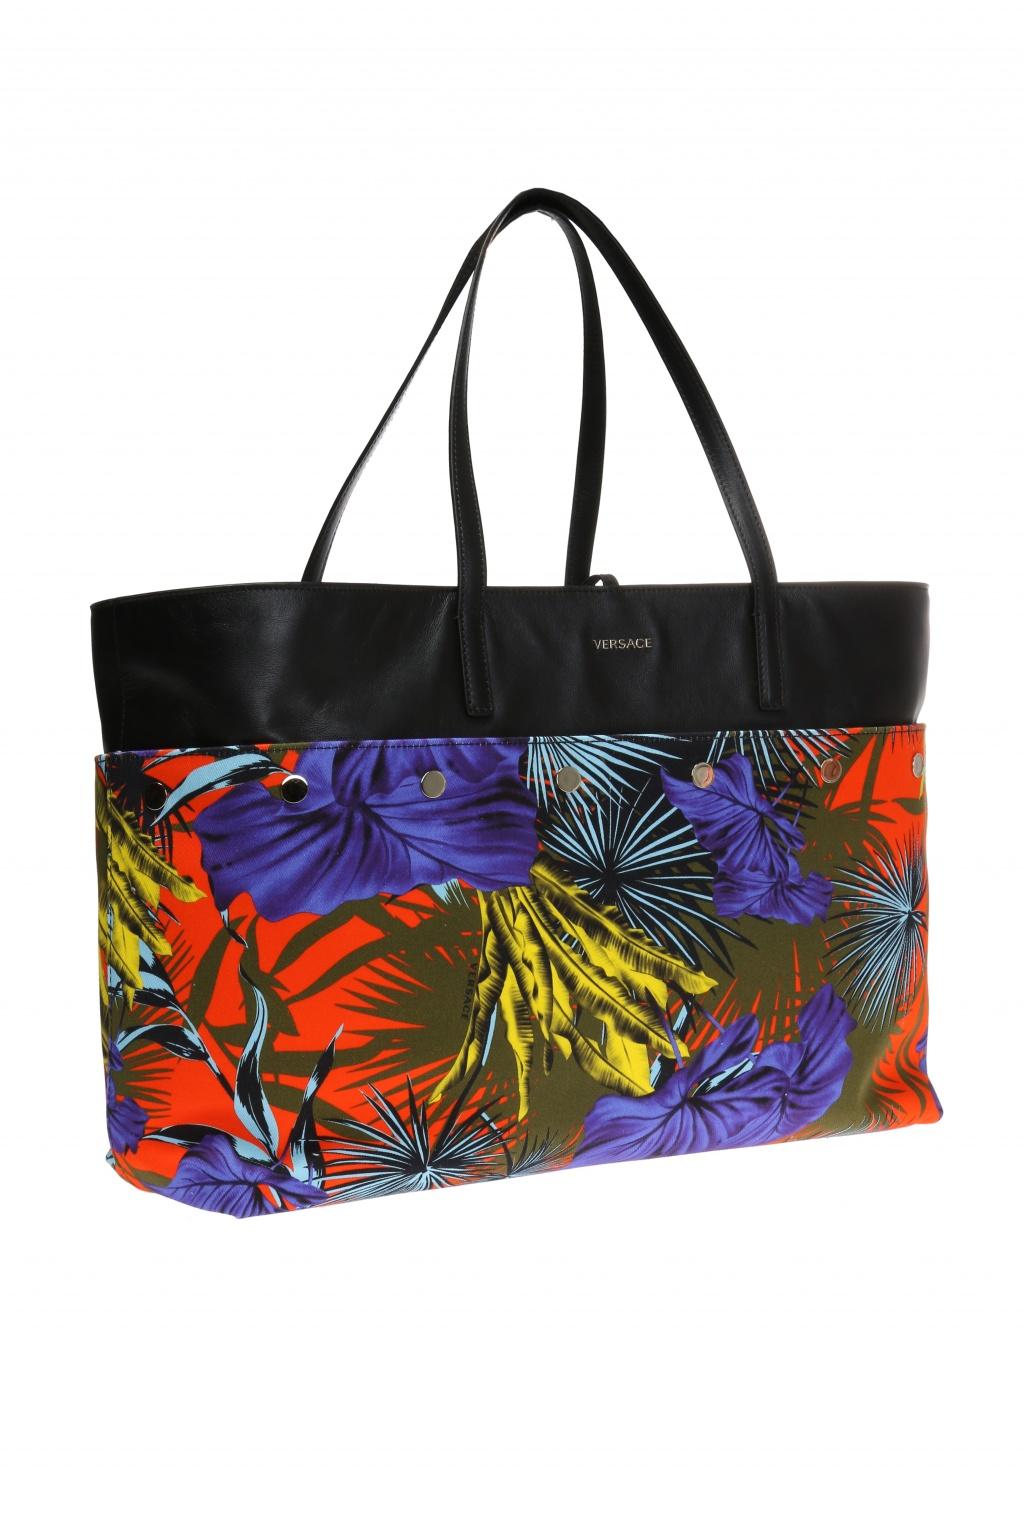 Versace SS18 Multicolor Desert Palm Shopping Tote Bag with Leather Straps In New Condition In Paradise Island, BS